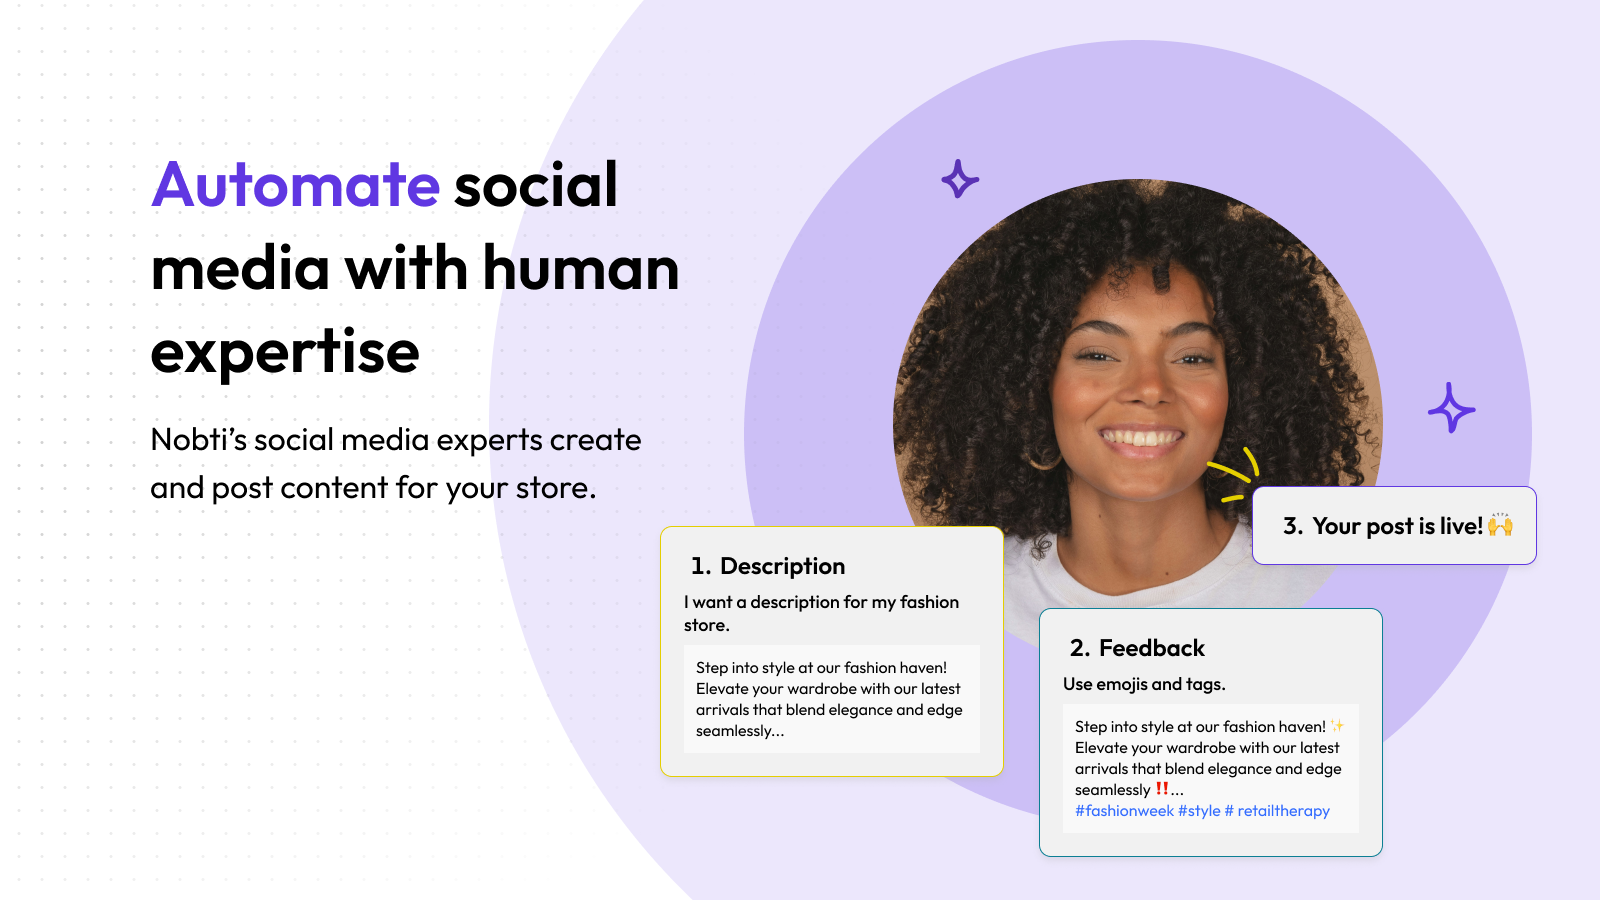 Automate social media growth with human expertise, high quality